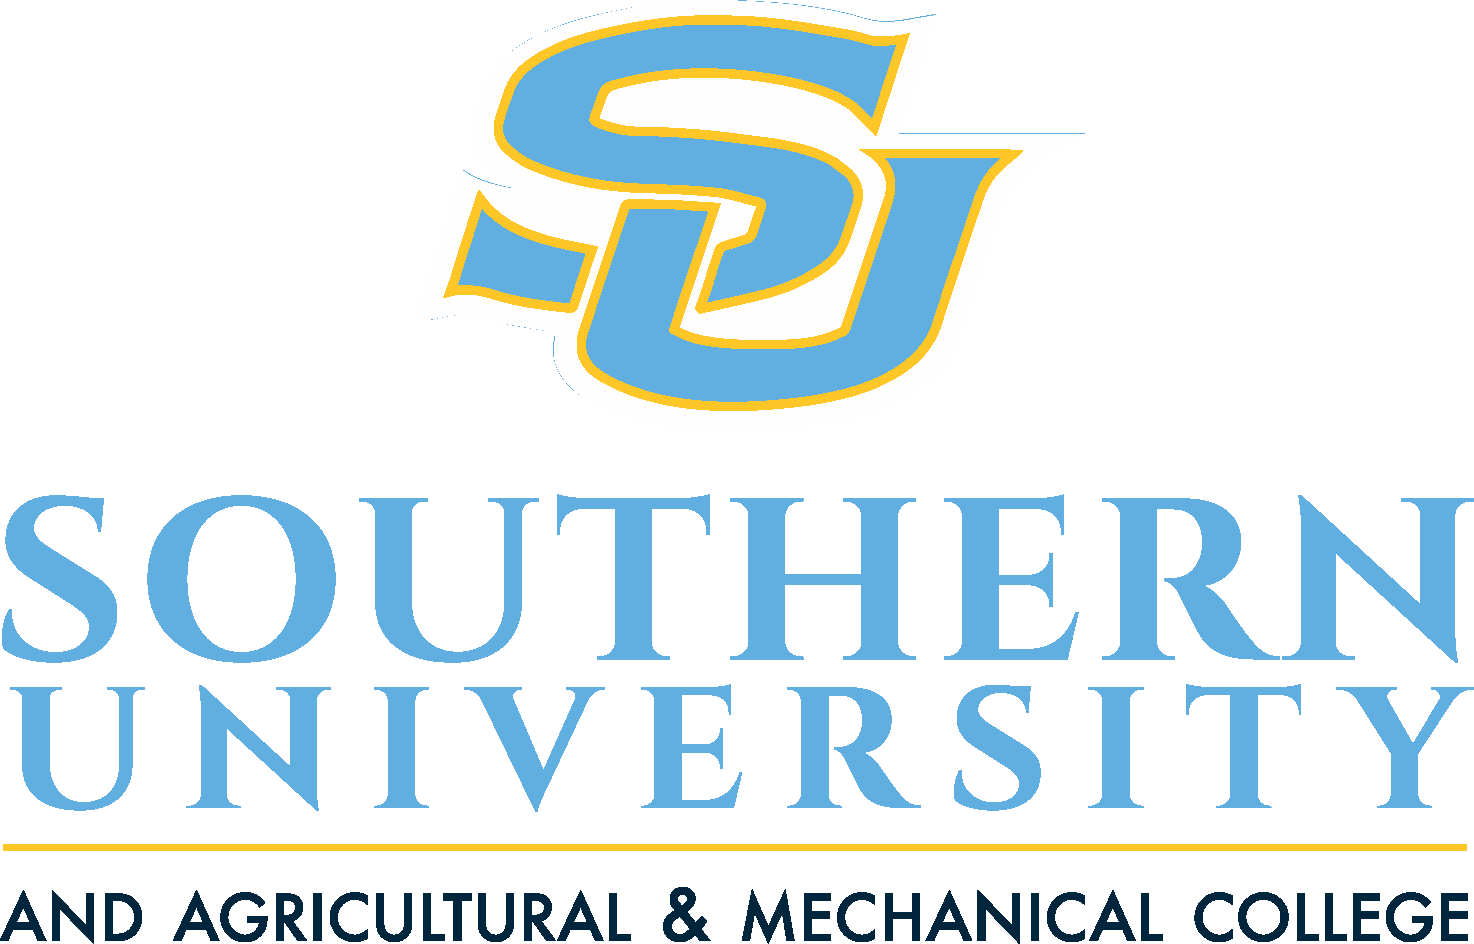 Southern University AND AGRICULTURAL & MECHANICAL COLLEGE 